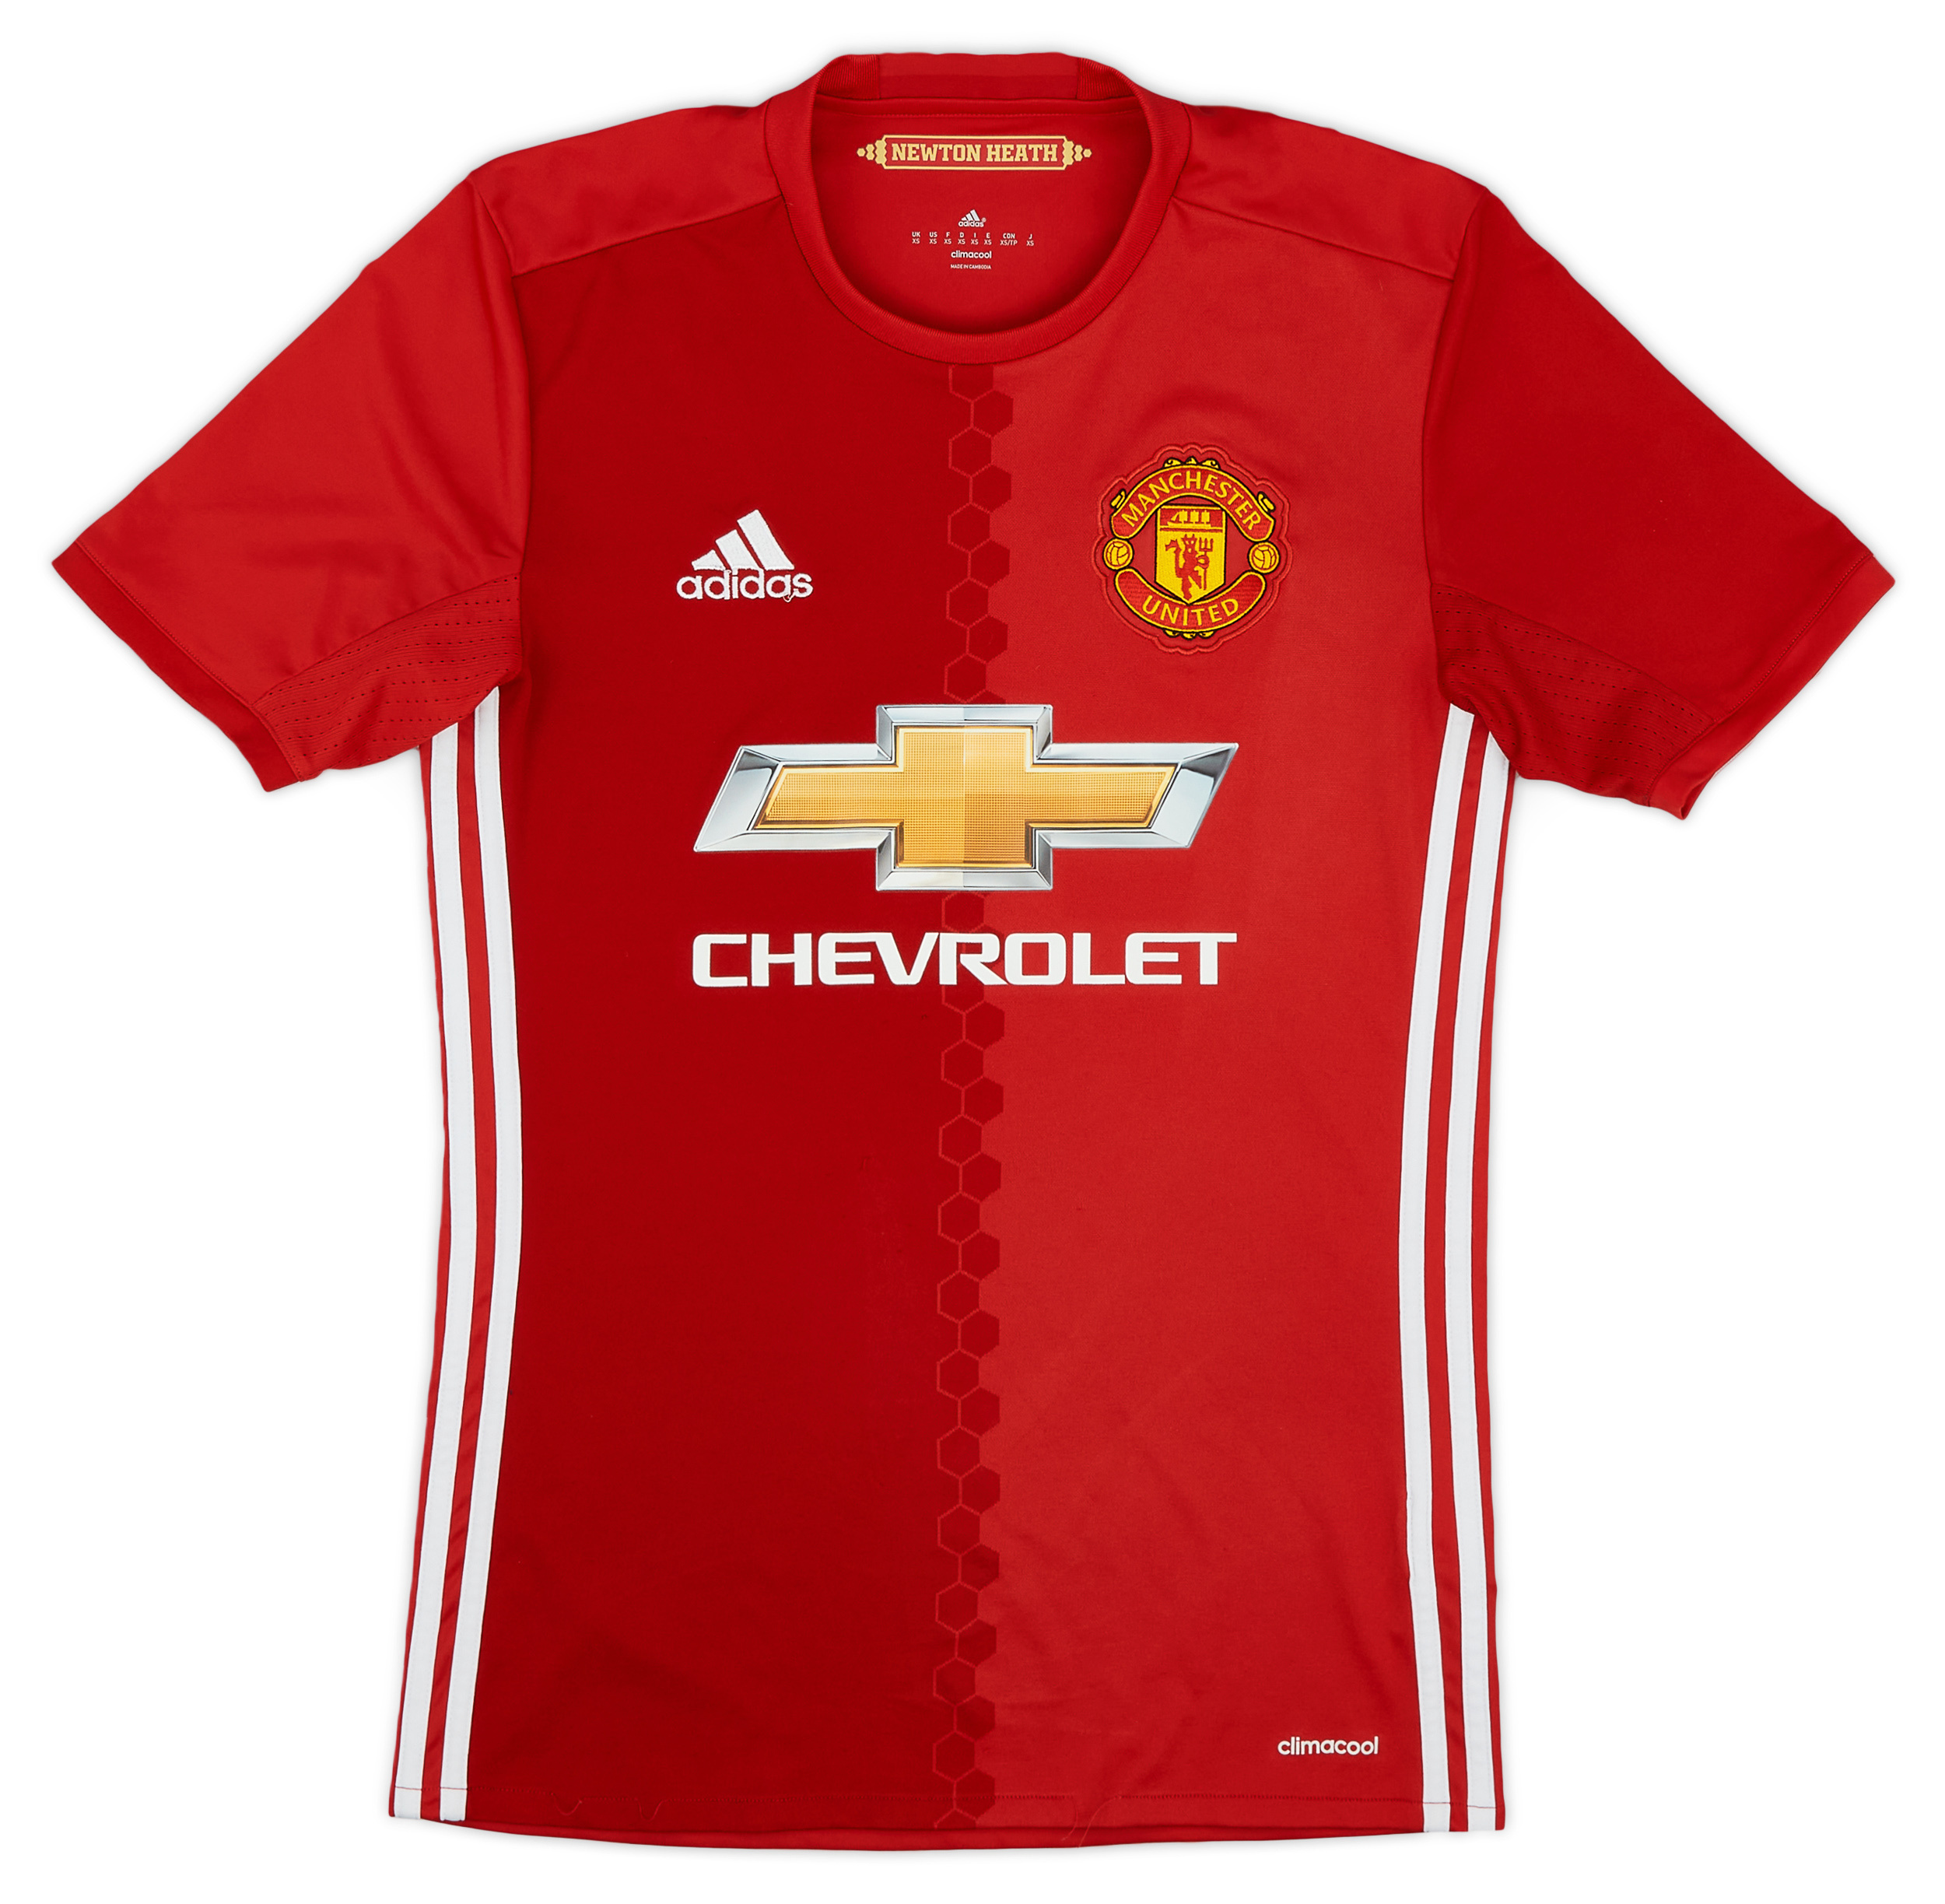 2016-17 Manchester United Home Shirt - 7/10 - ()